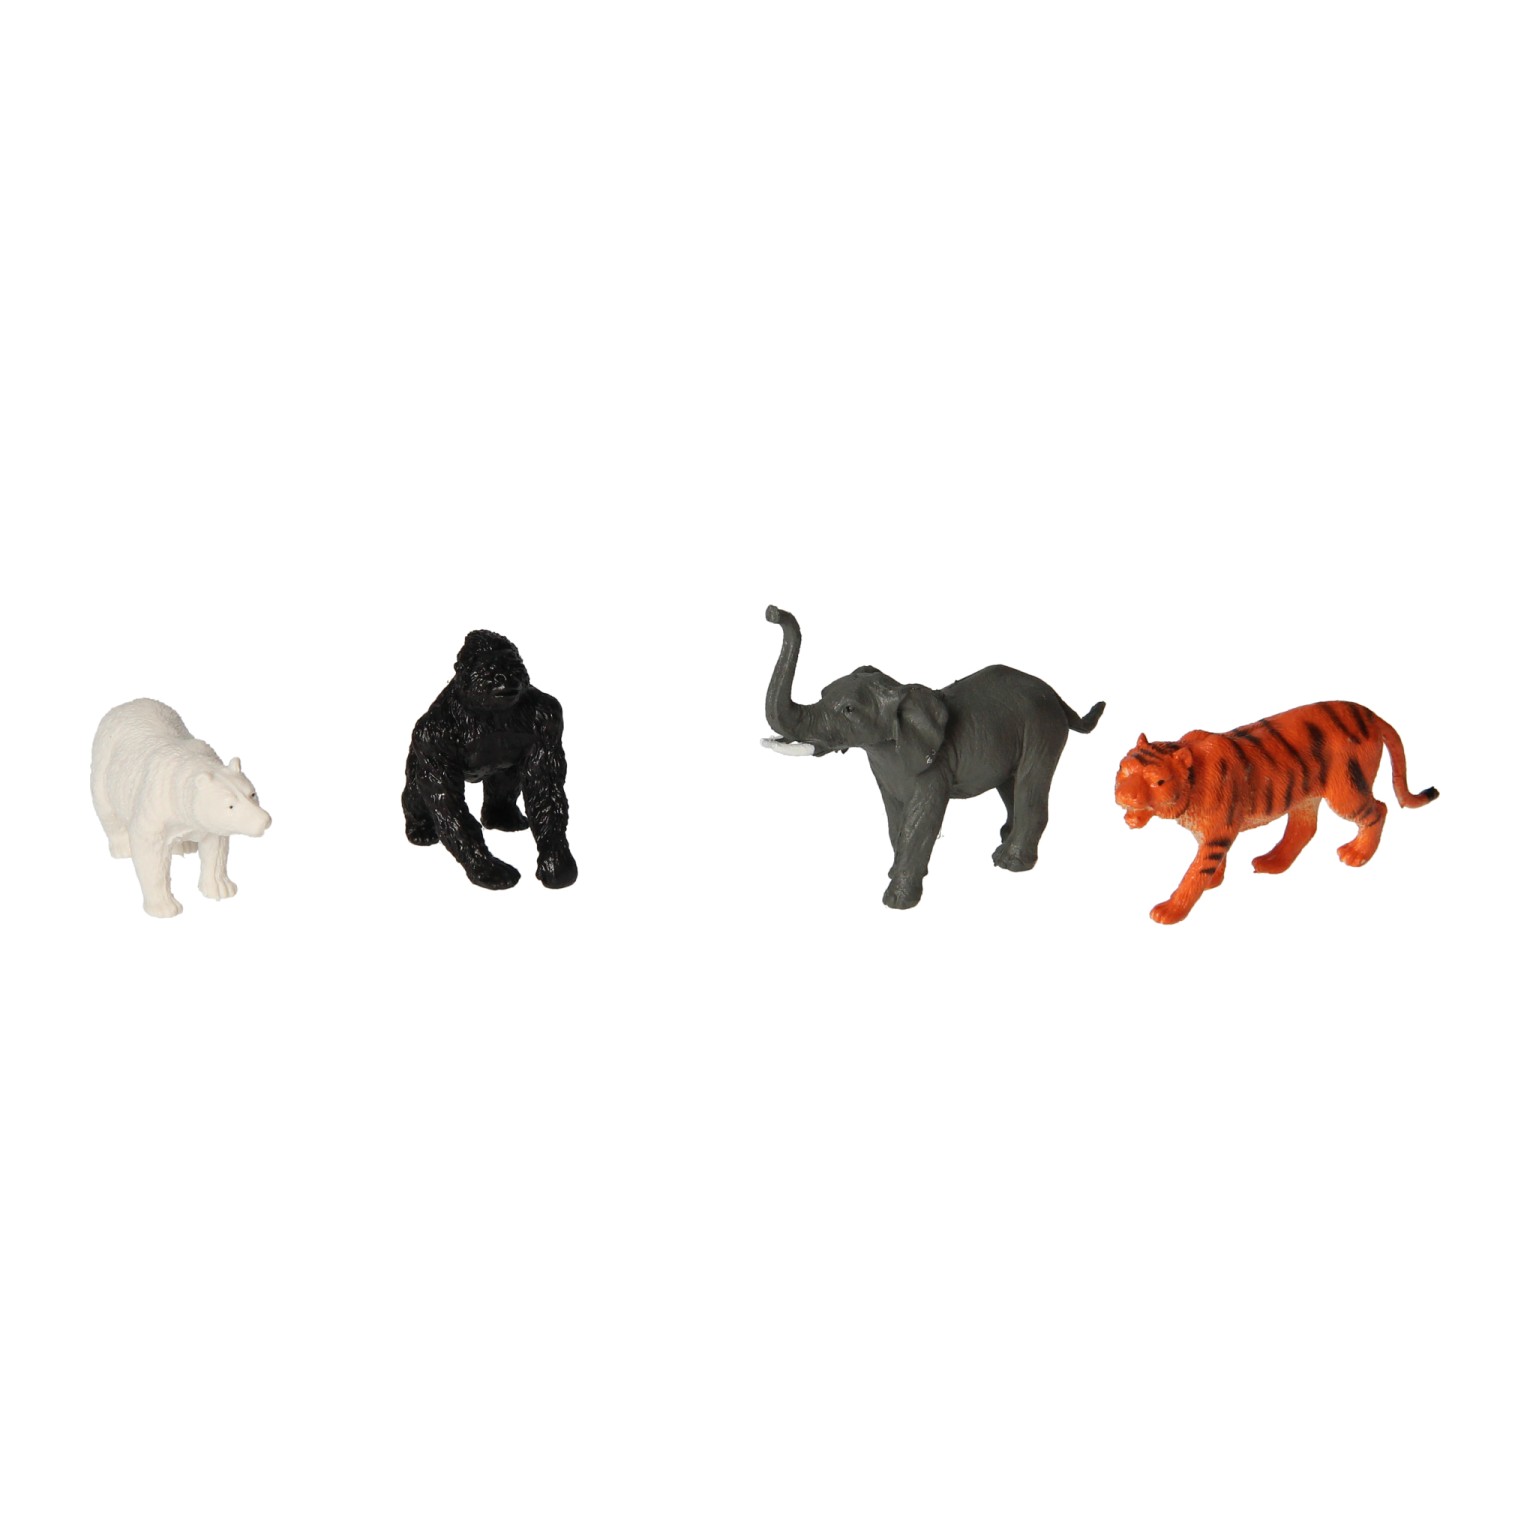 Animaux sauvages, 4pcs.